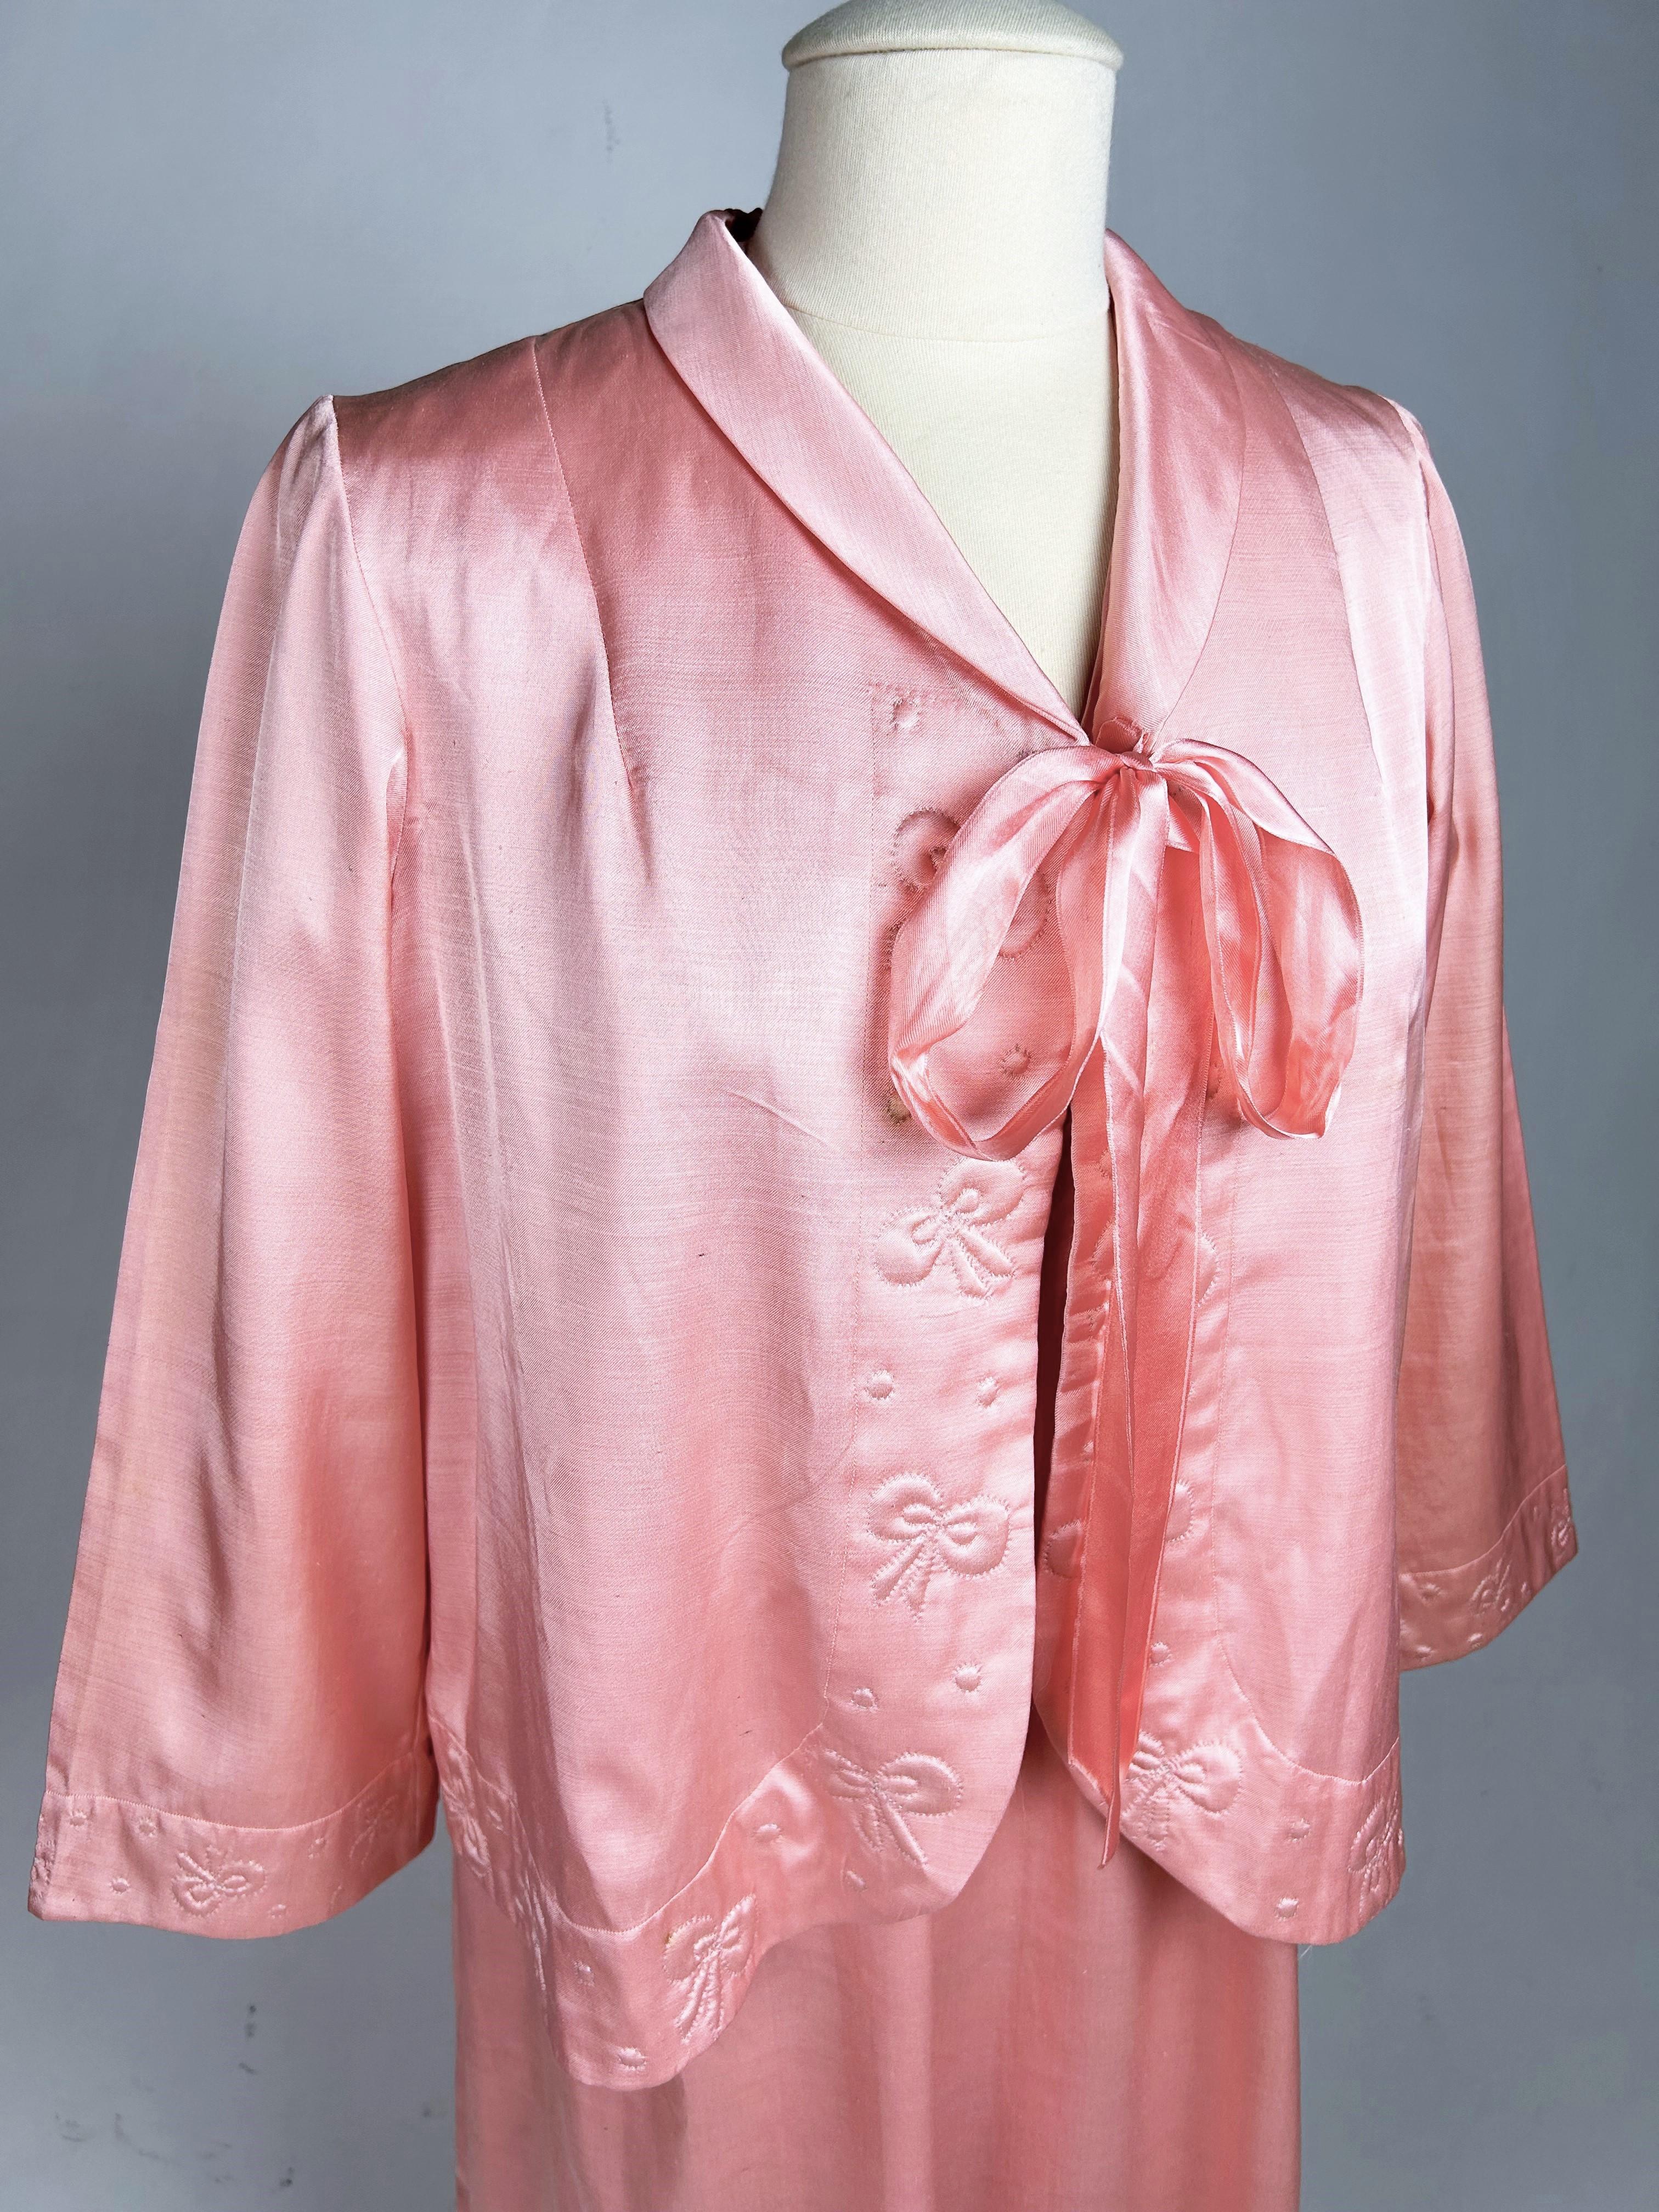 Circa 1950-1960

France

Nightwear set consisting of a belted shirt and wrap-around bolero in pink satin dating from 1950-1960. Long, full dress with small balloon sleeves, fastened at the front with four mother-of-pearl buttons. Beautiful quilted